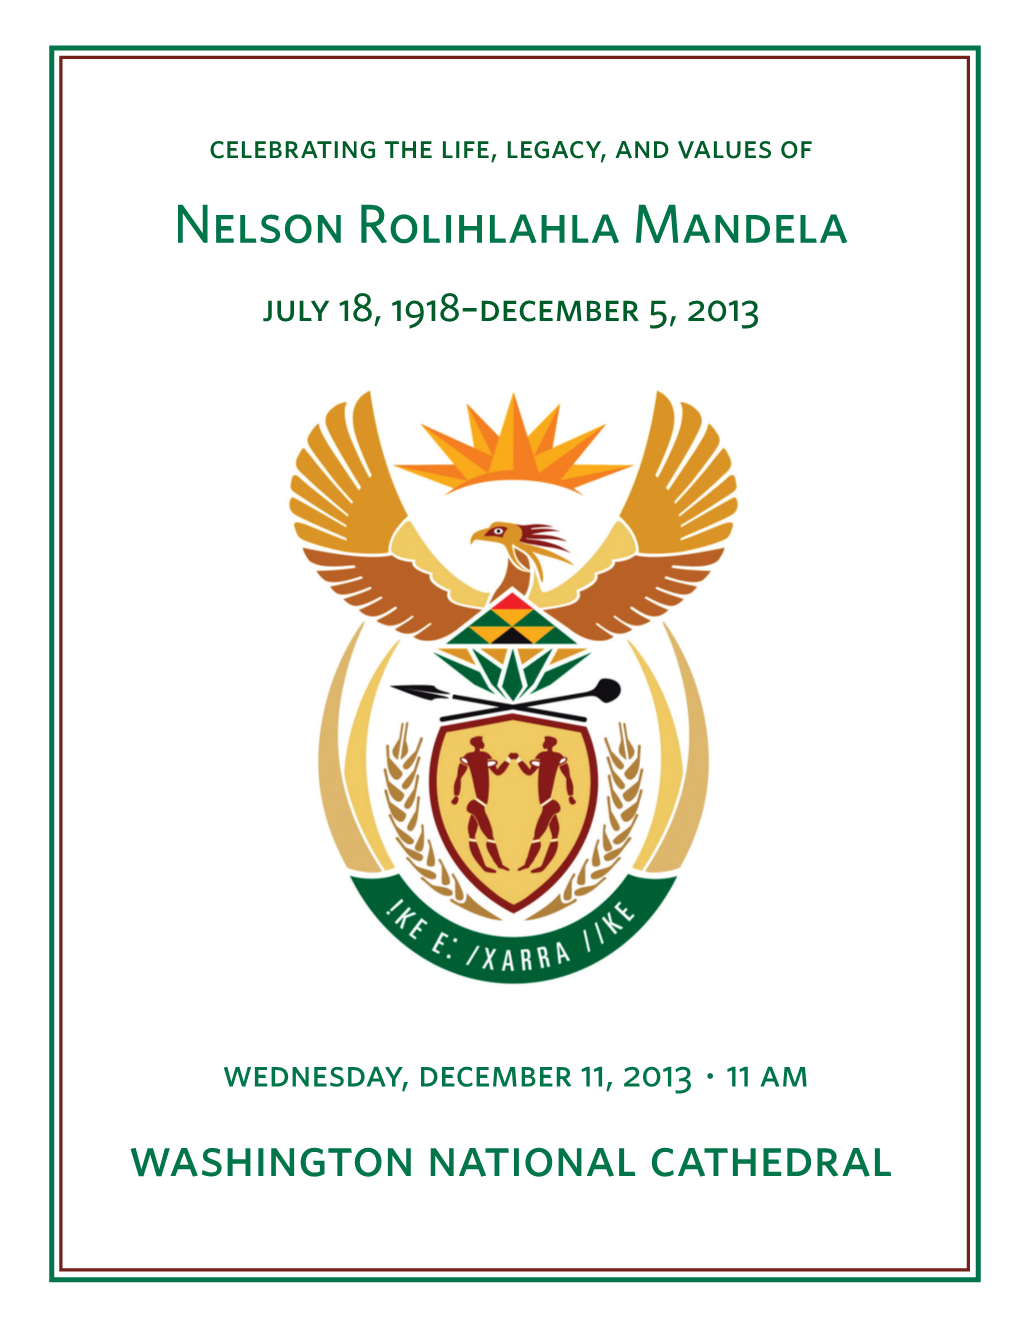 Celebrating the Life, Legacy, and Values of Nelson Mandela • Wednesday, December 11, 2013 Prelude Steal Away Arr